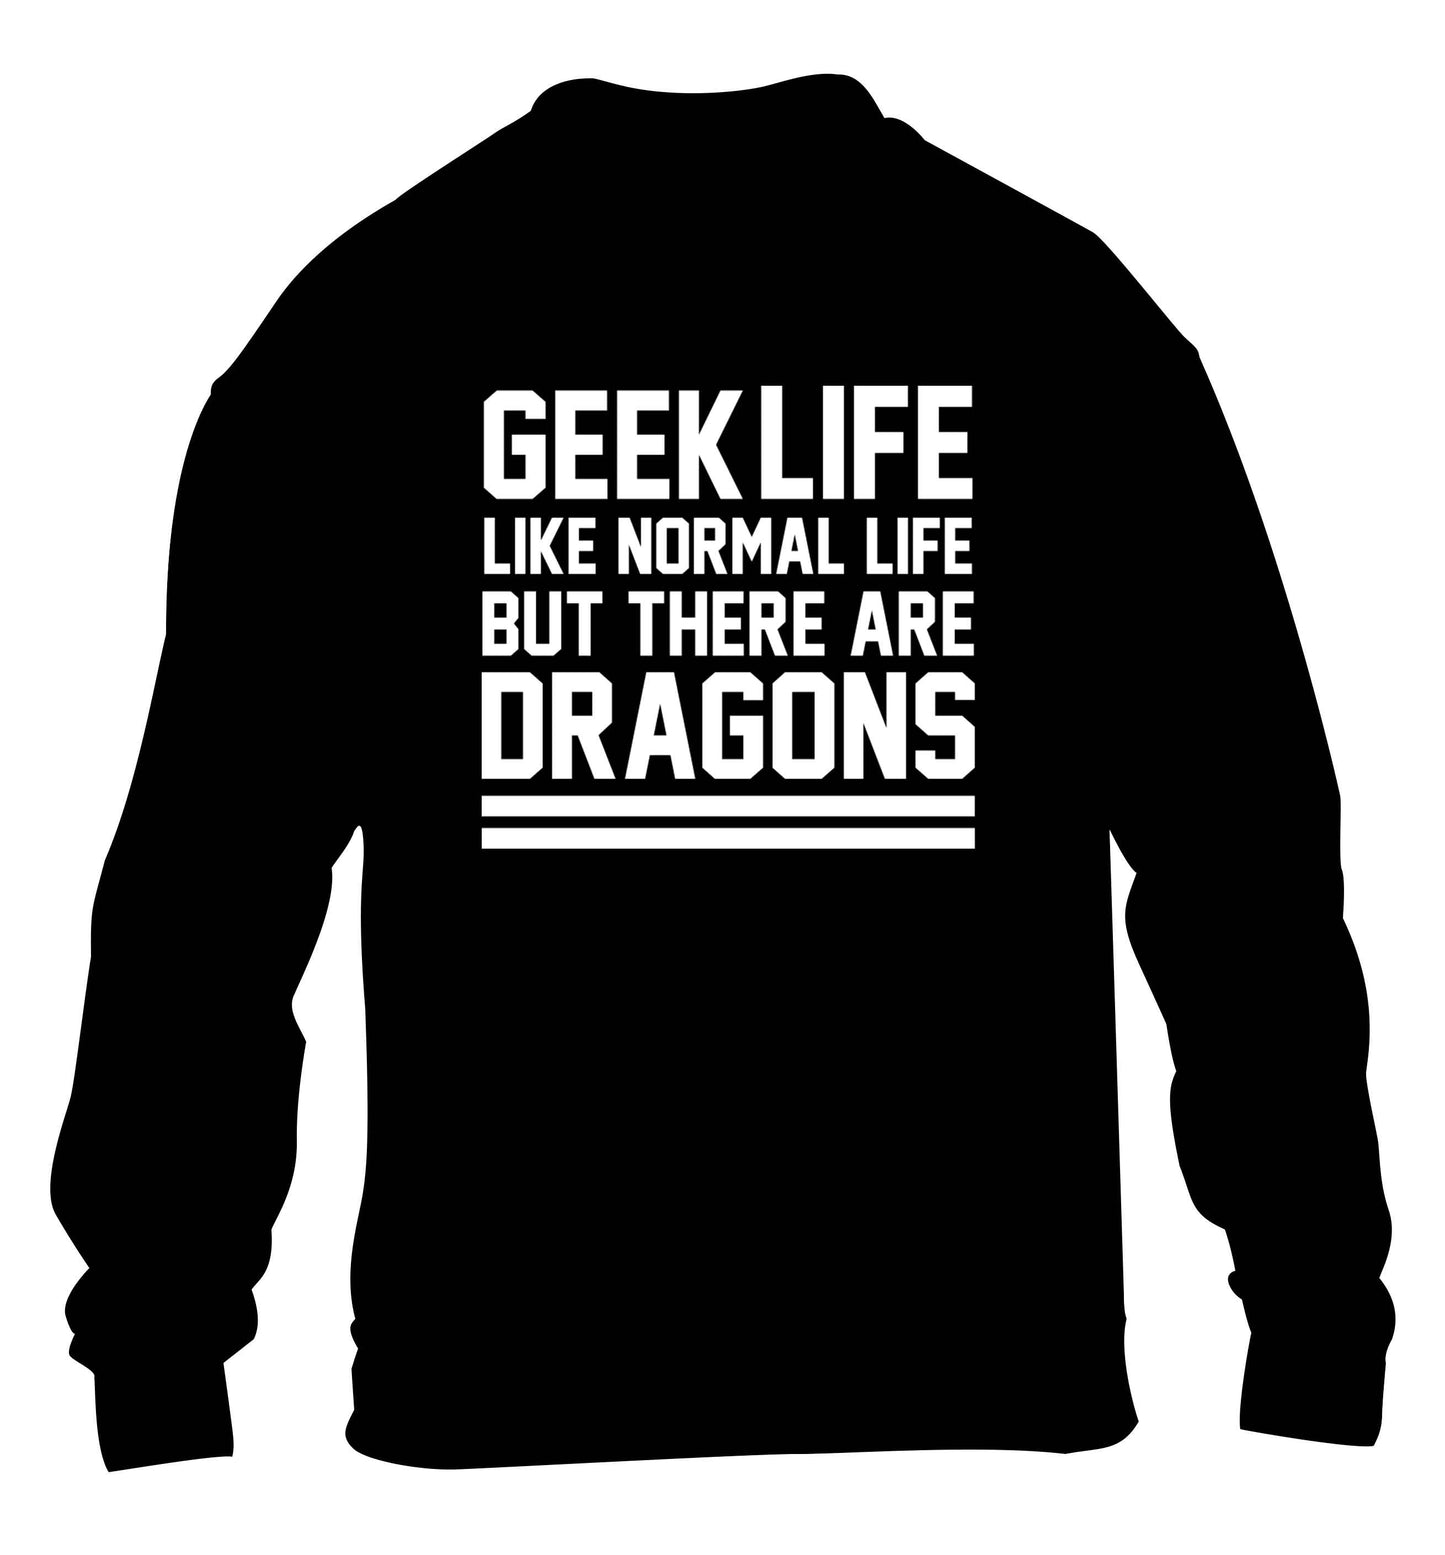 Geek life like normal life but there are dragons children's black sweater 12-13 Years